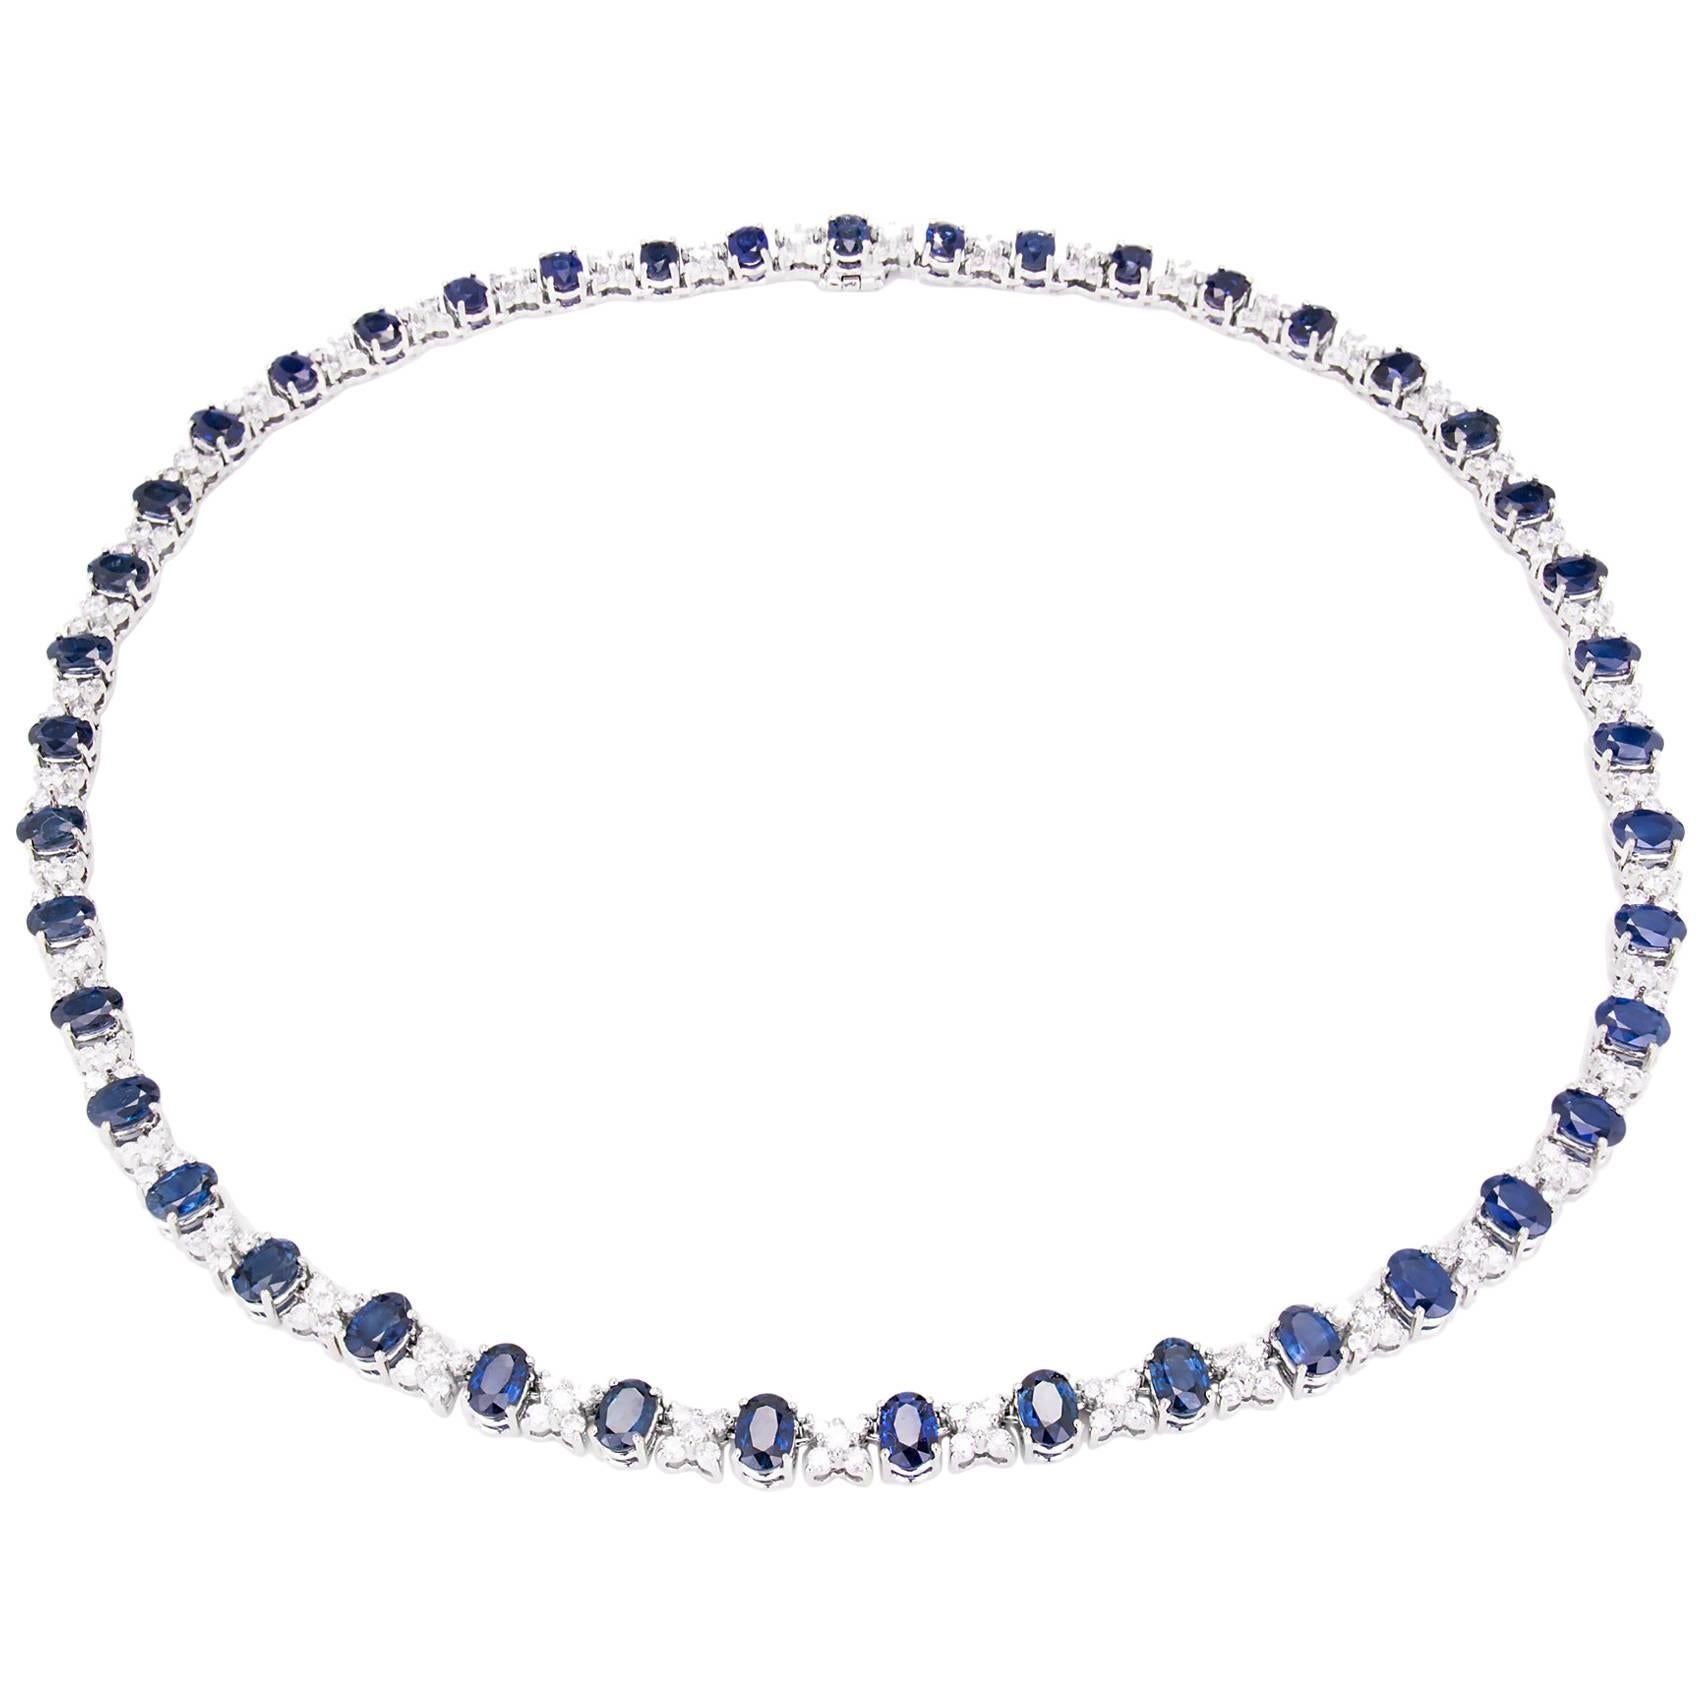 GIA Certified 23.45 Carat Sapphire Diamond Gold Necklace